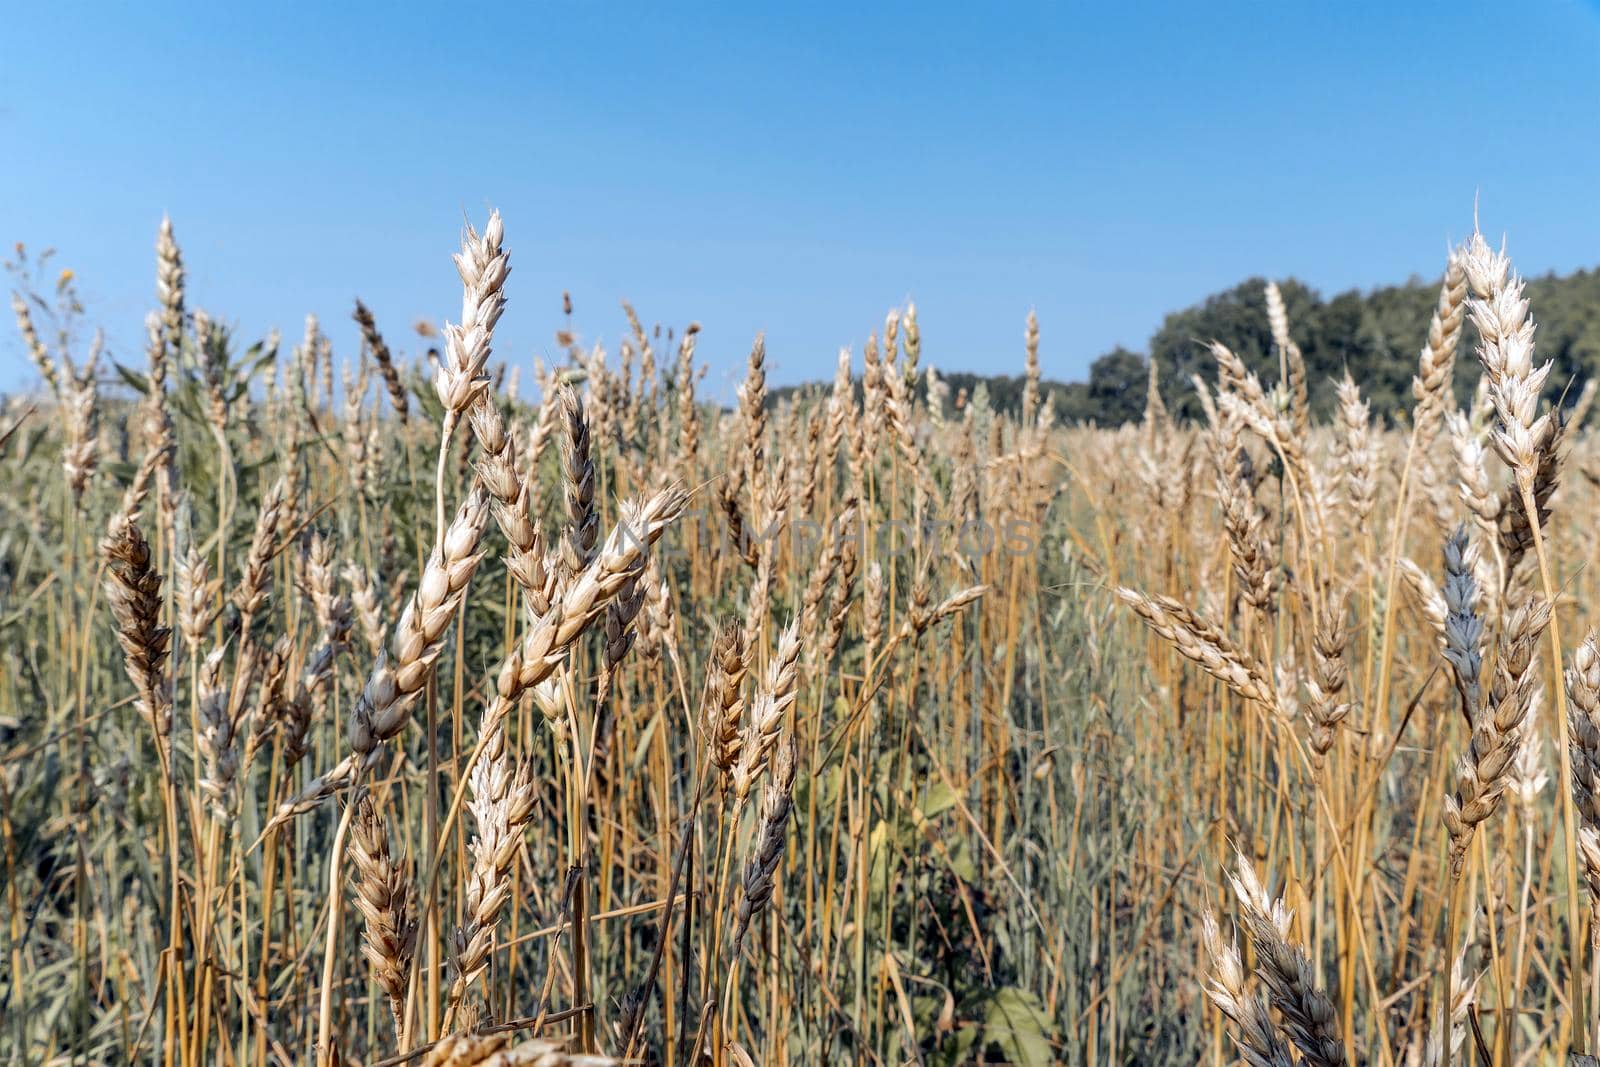 Growing grain crops in a field or meadow.Wheat ears sway in the wind against the background of sunlight and blue sky.Nature, freedom.The sun's rays will shine through the grain stalks.Harvesting